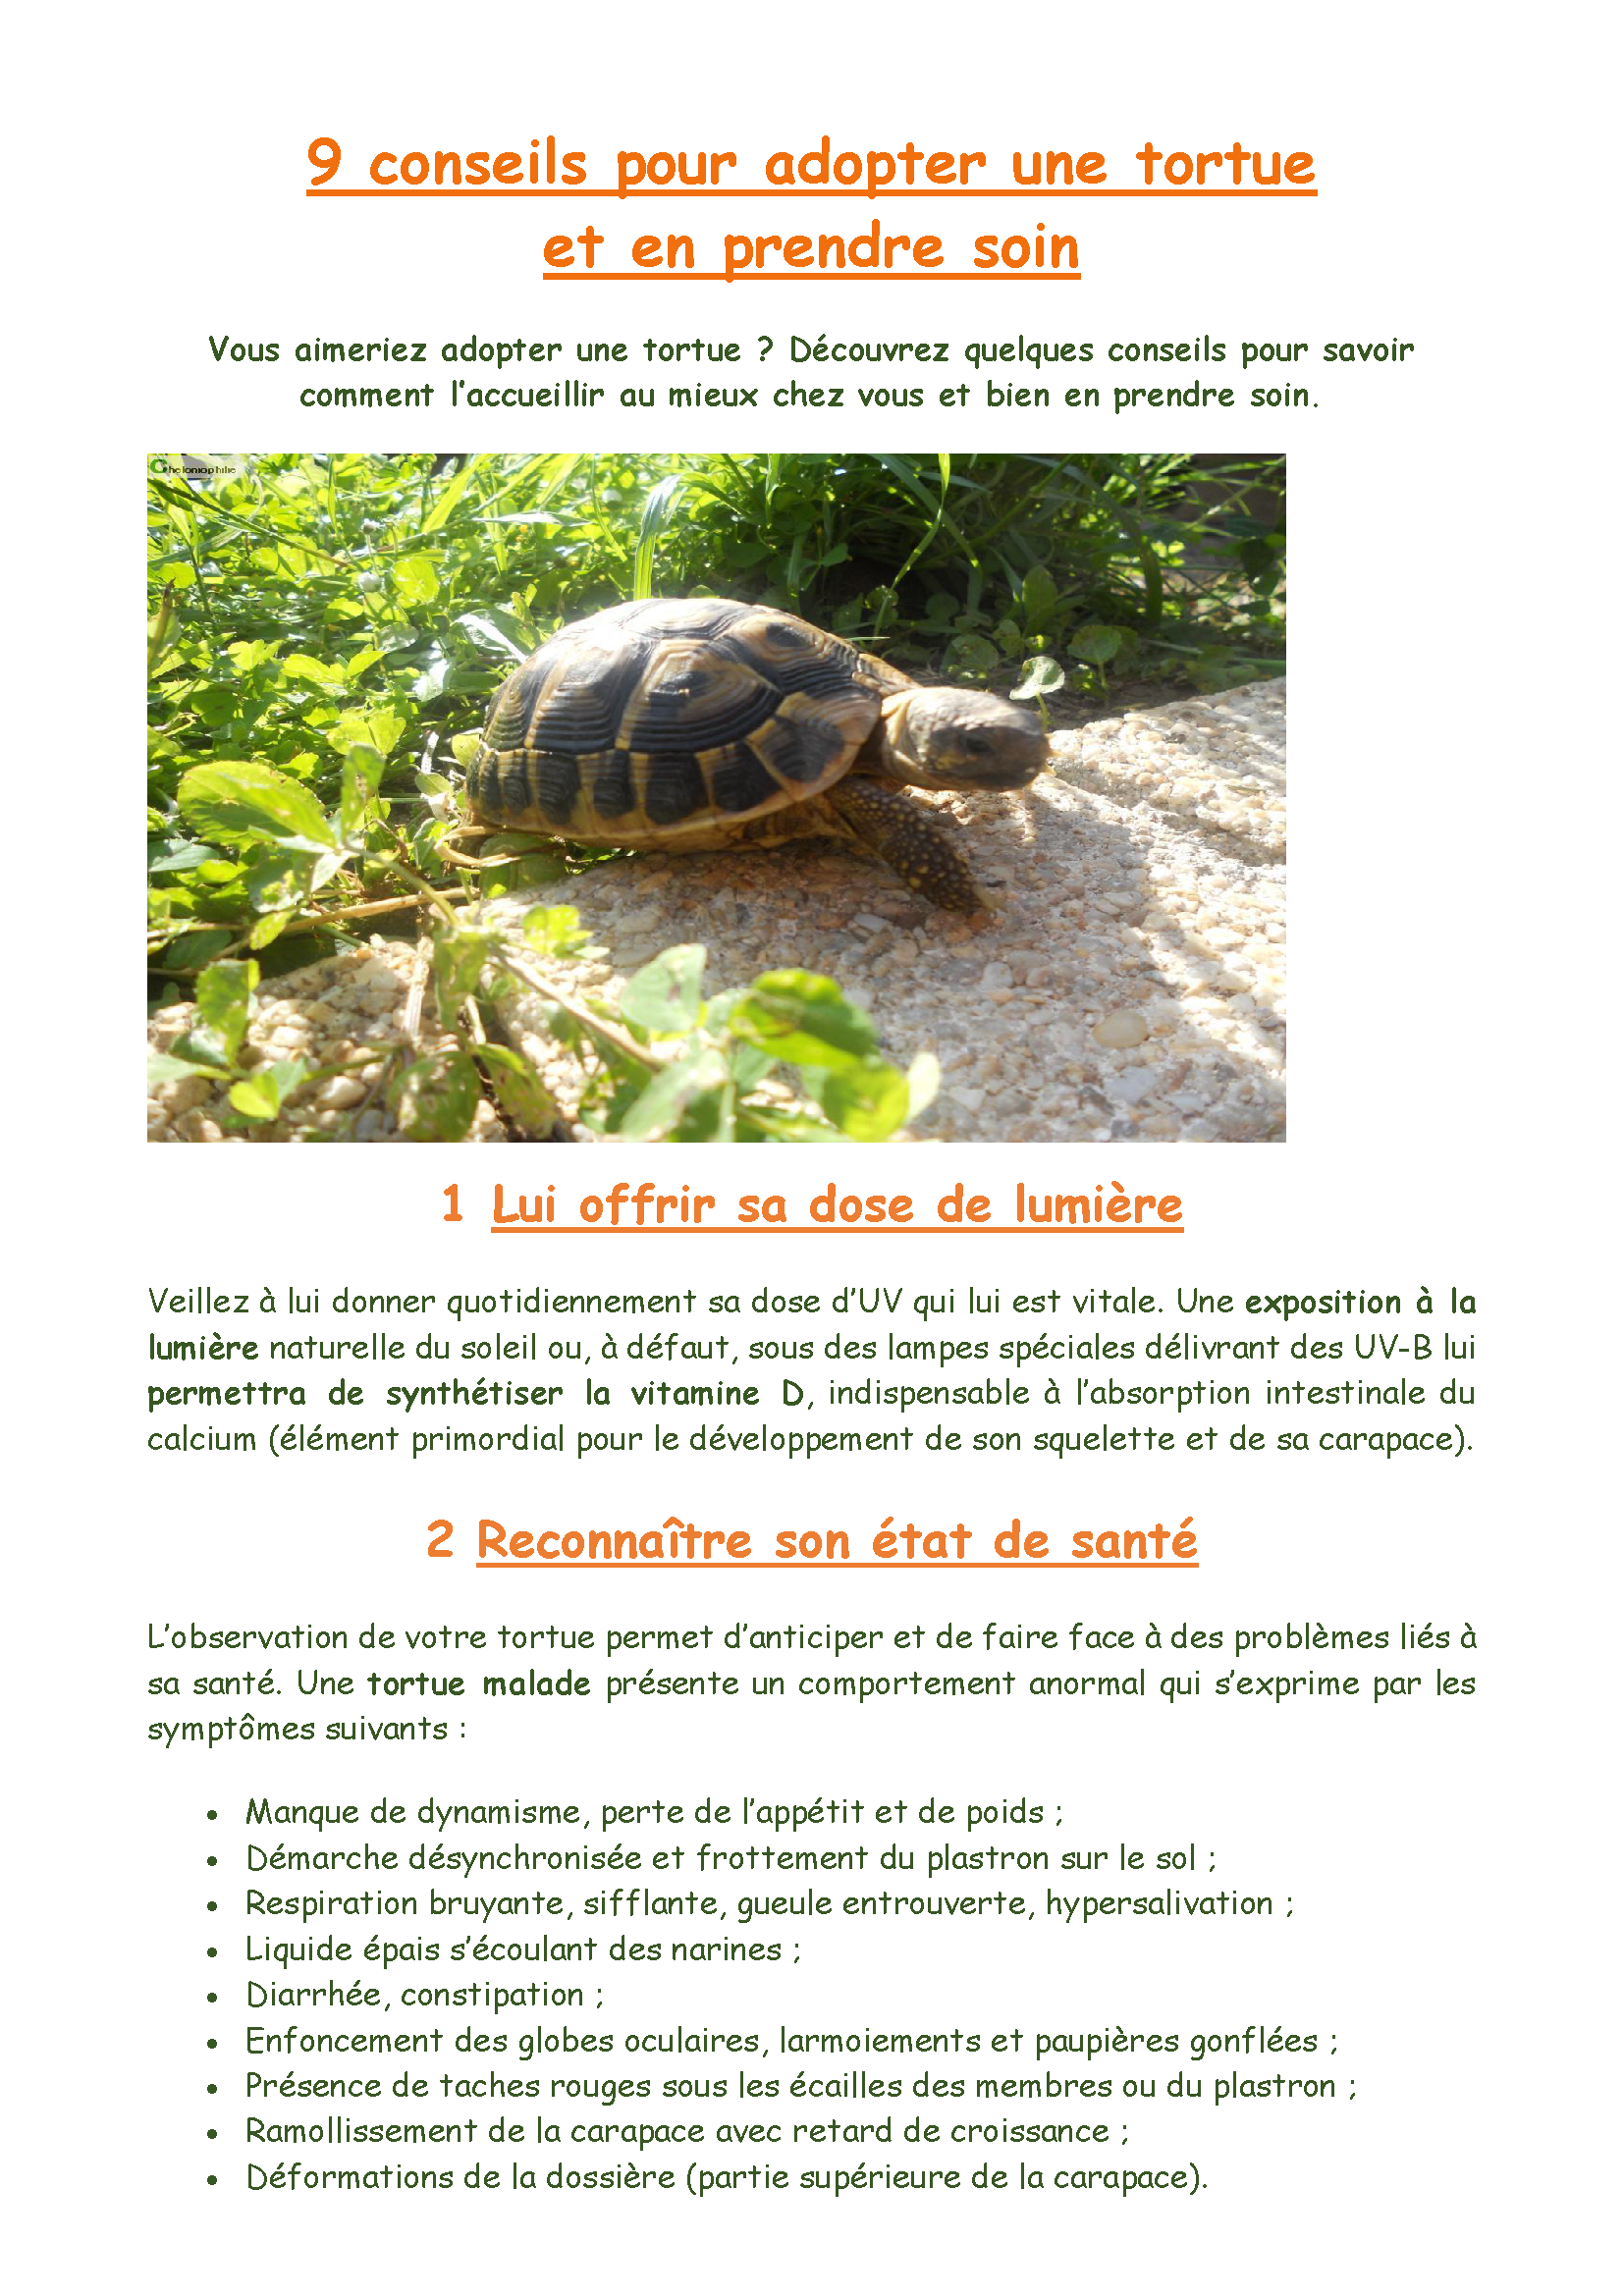 Prendre soin de ma Tortue - Nathalie Galindo_Page_1.png